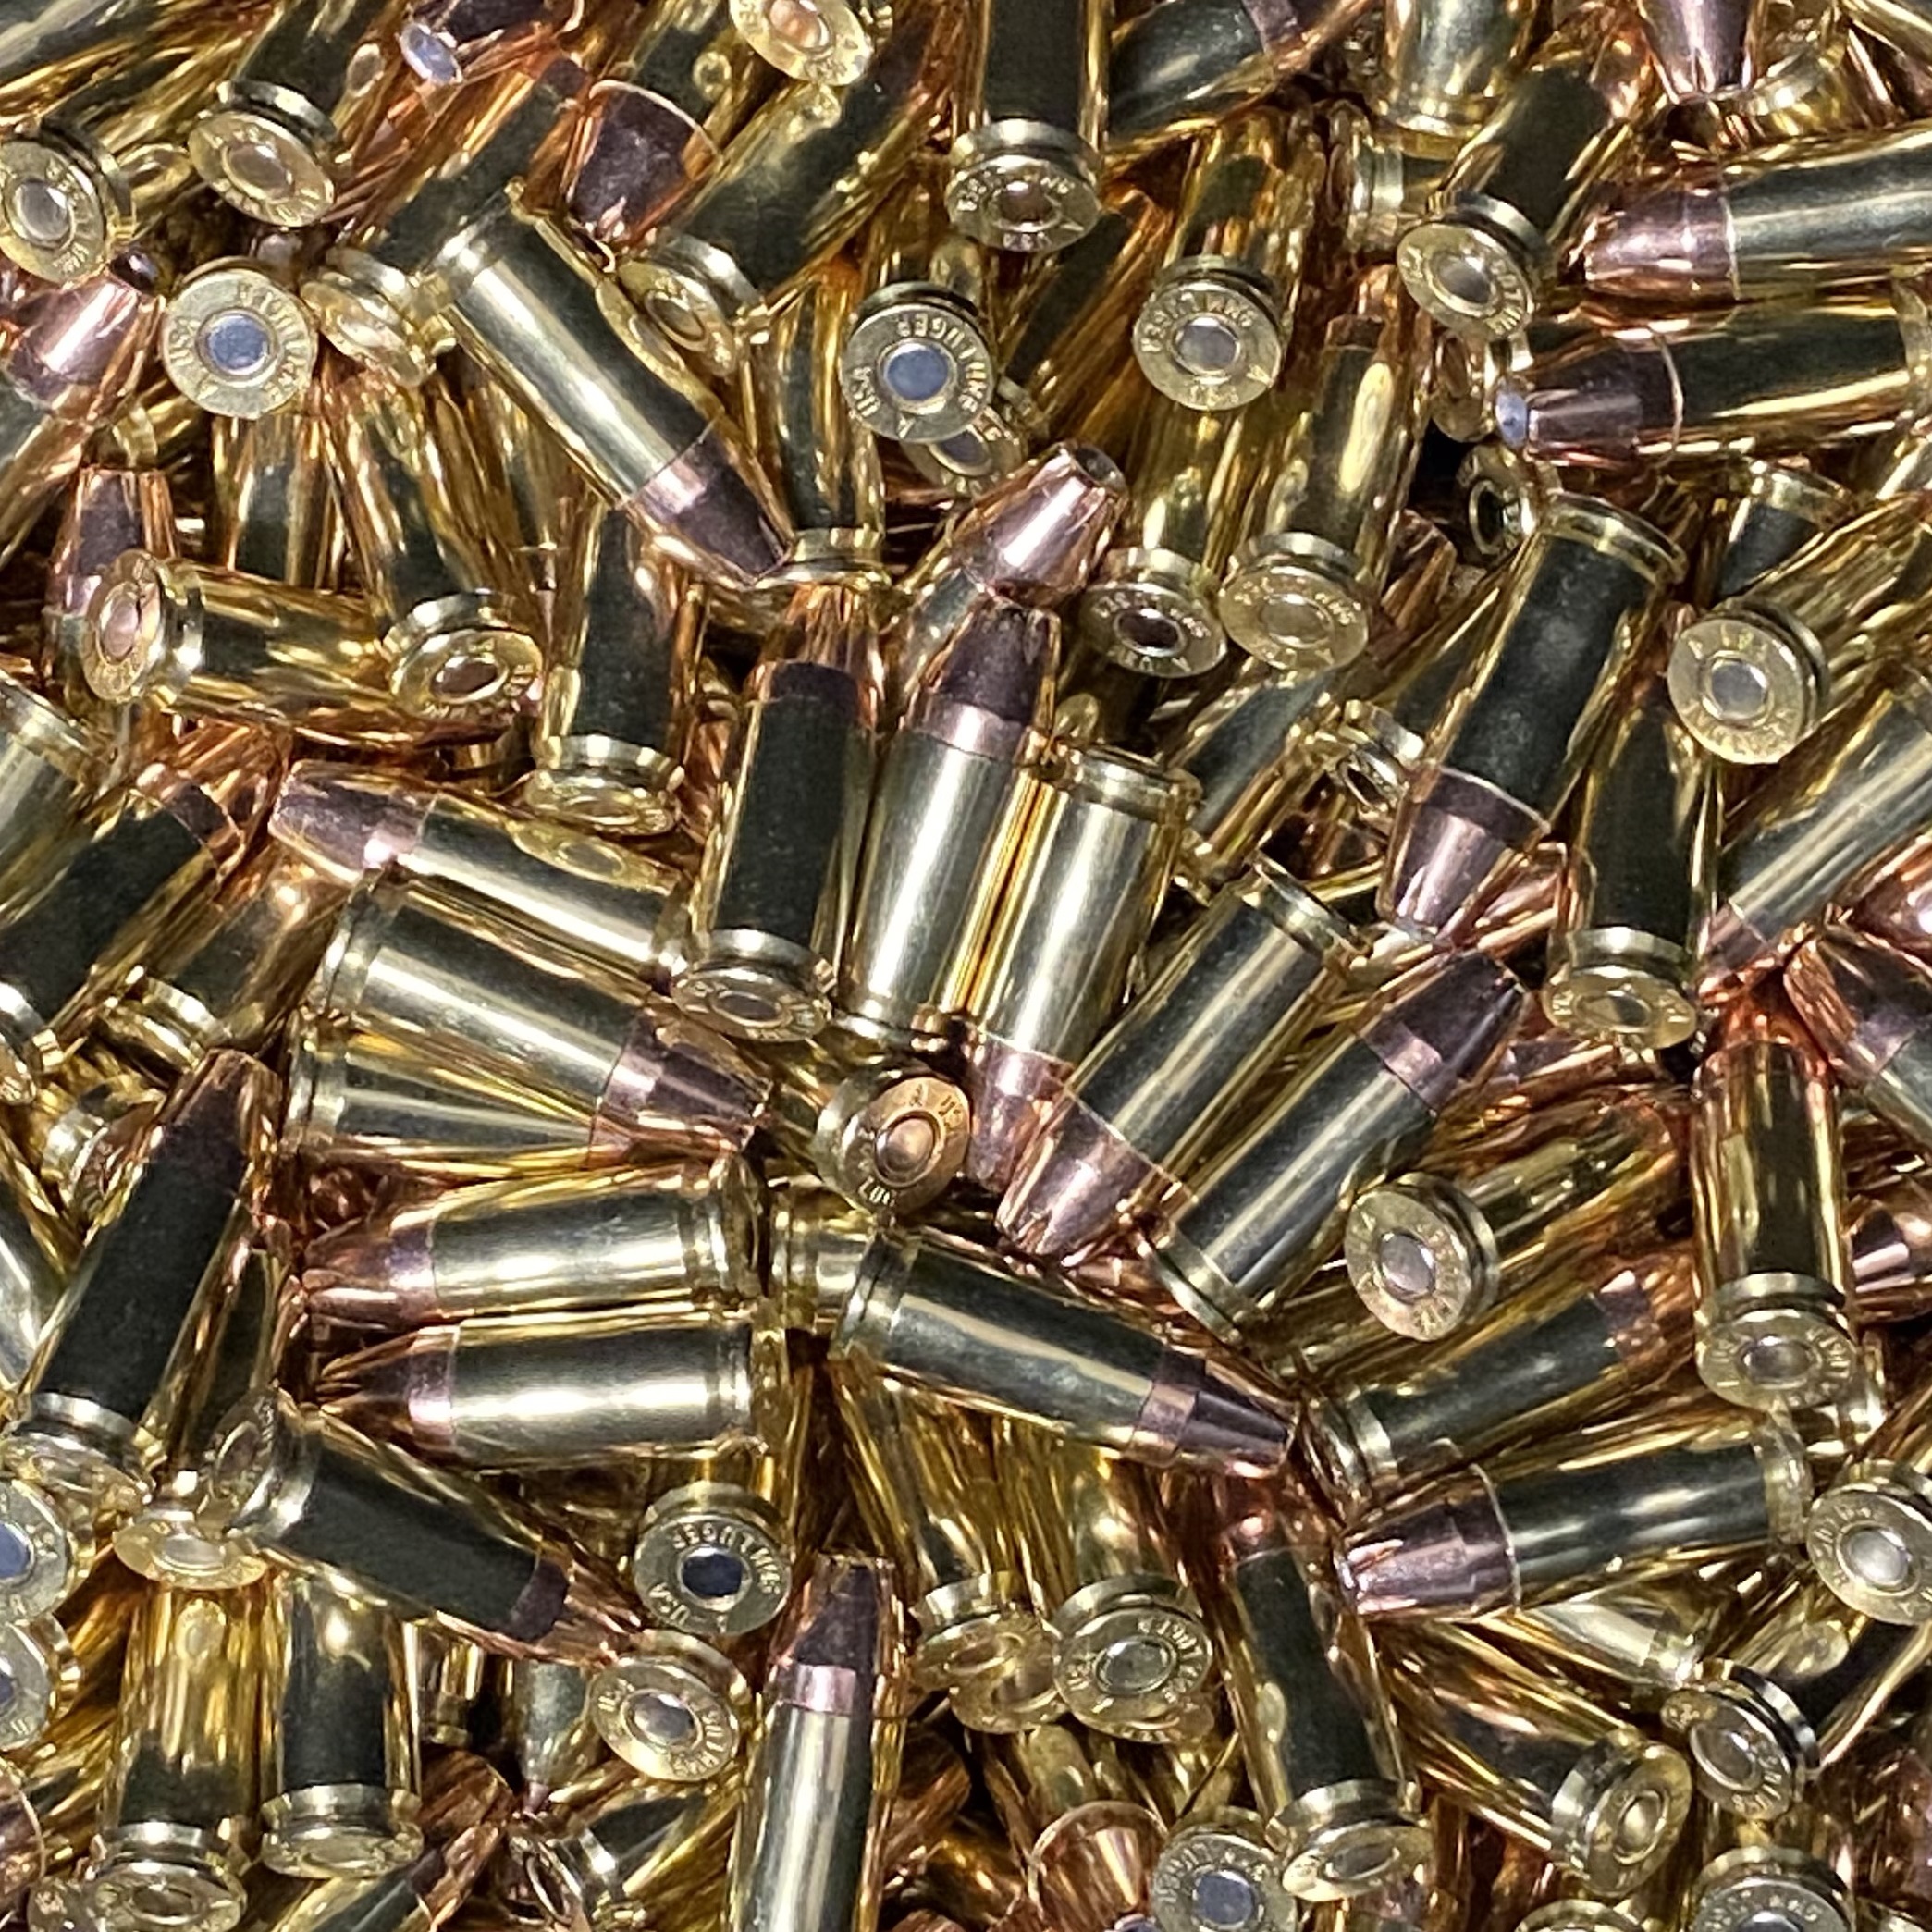 9mm Luger 124 gr. XTP Defense Loose. MEMORIAL DAY SALE! THROUGH MAY 29TH ONLY - SHIPS NBD